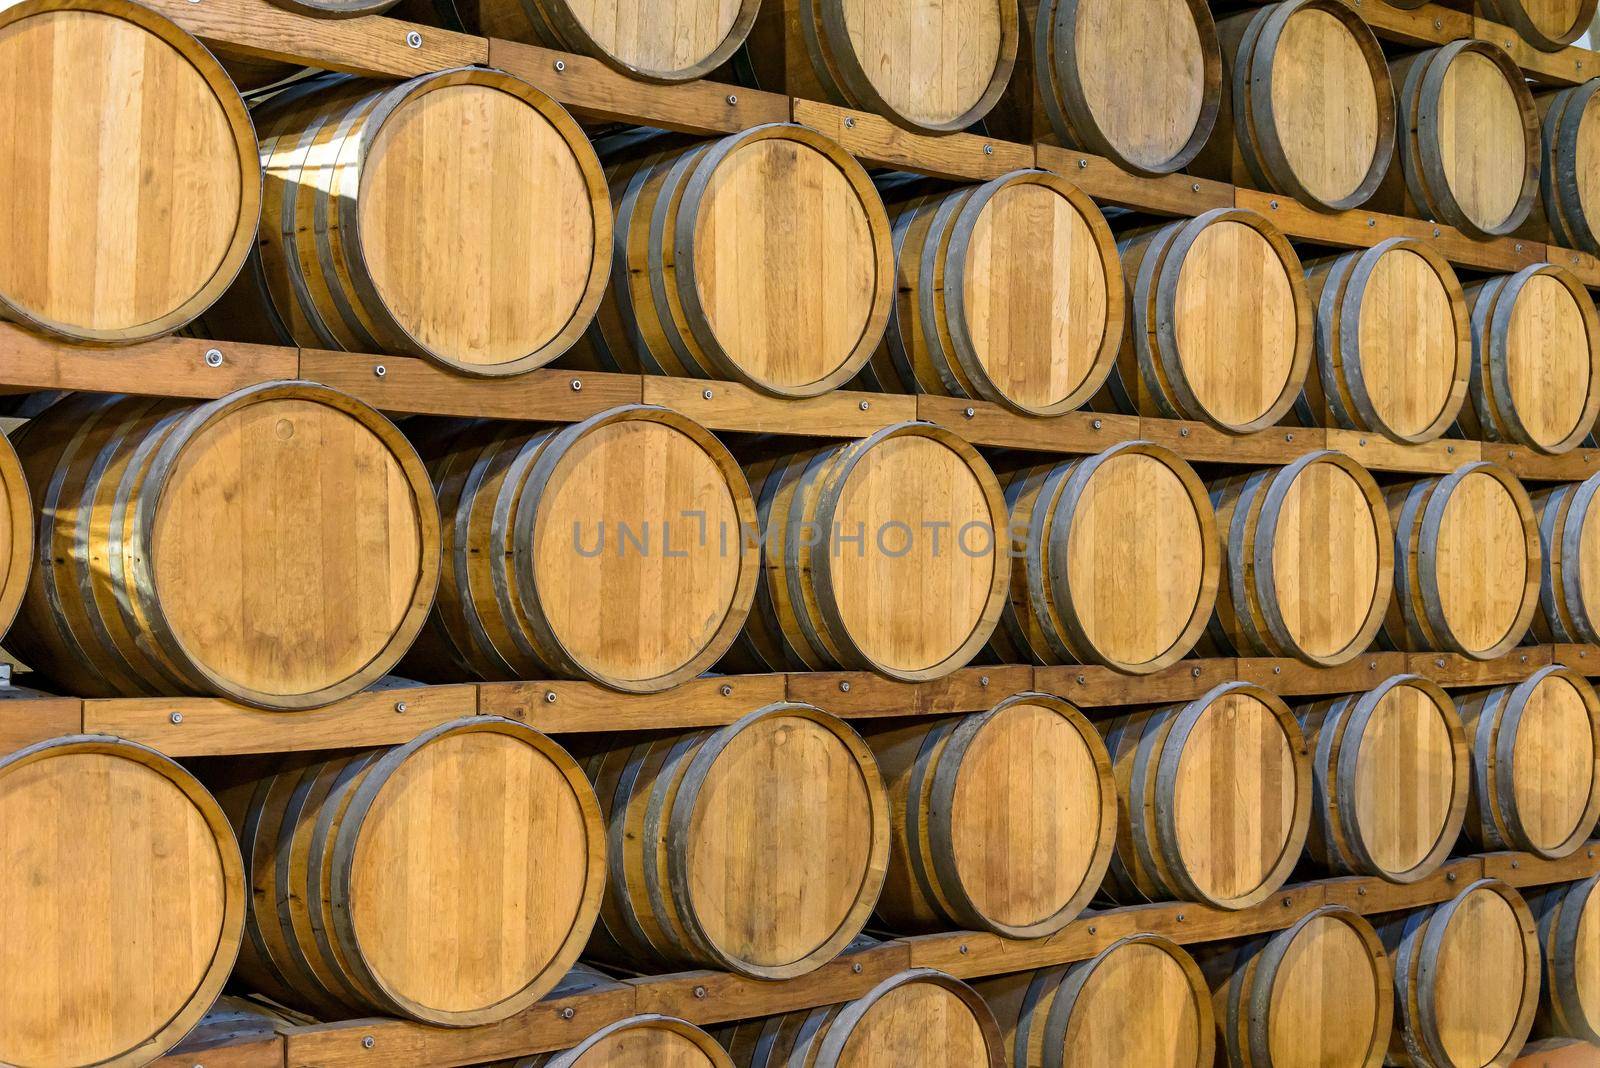 Wooden barrels in the wine cellar by mkos83